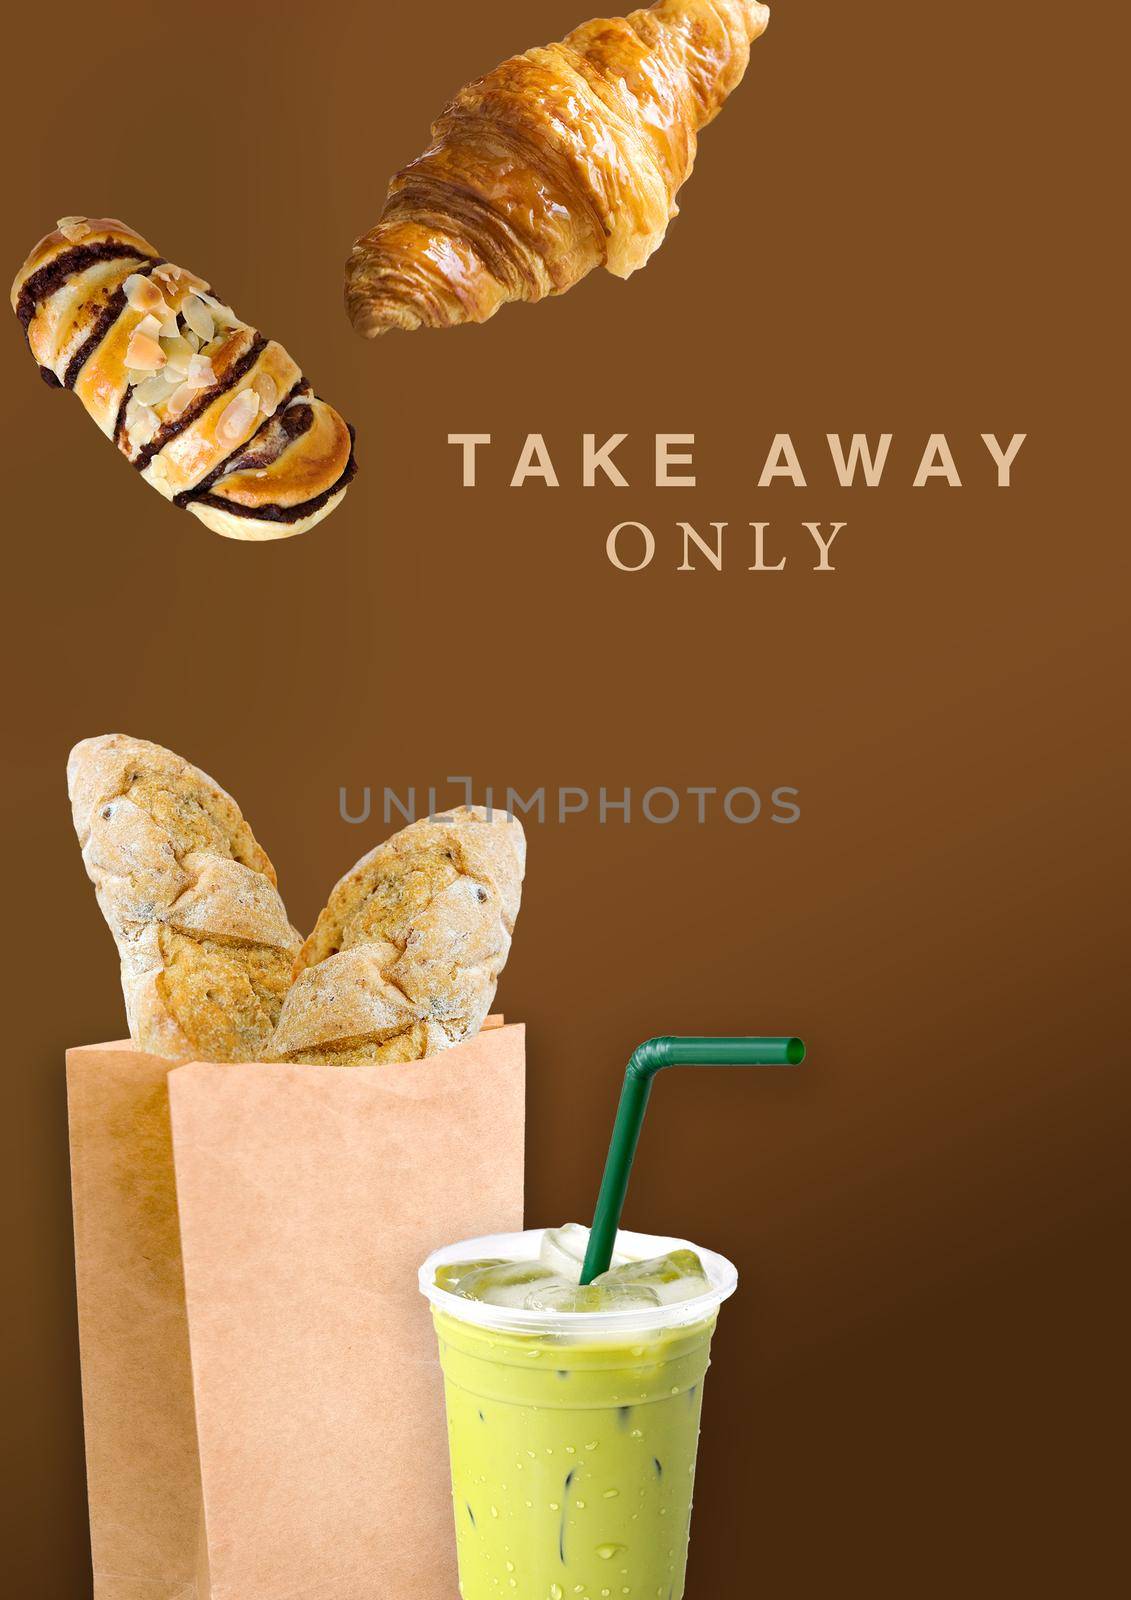 Takeaway pastries concept with message take away only on brown color background